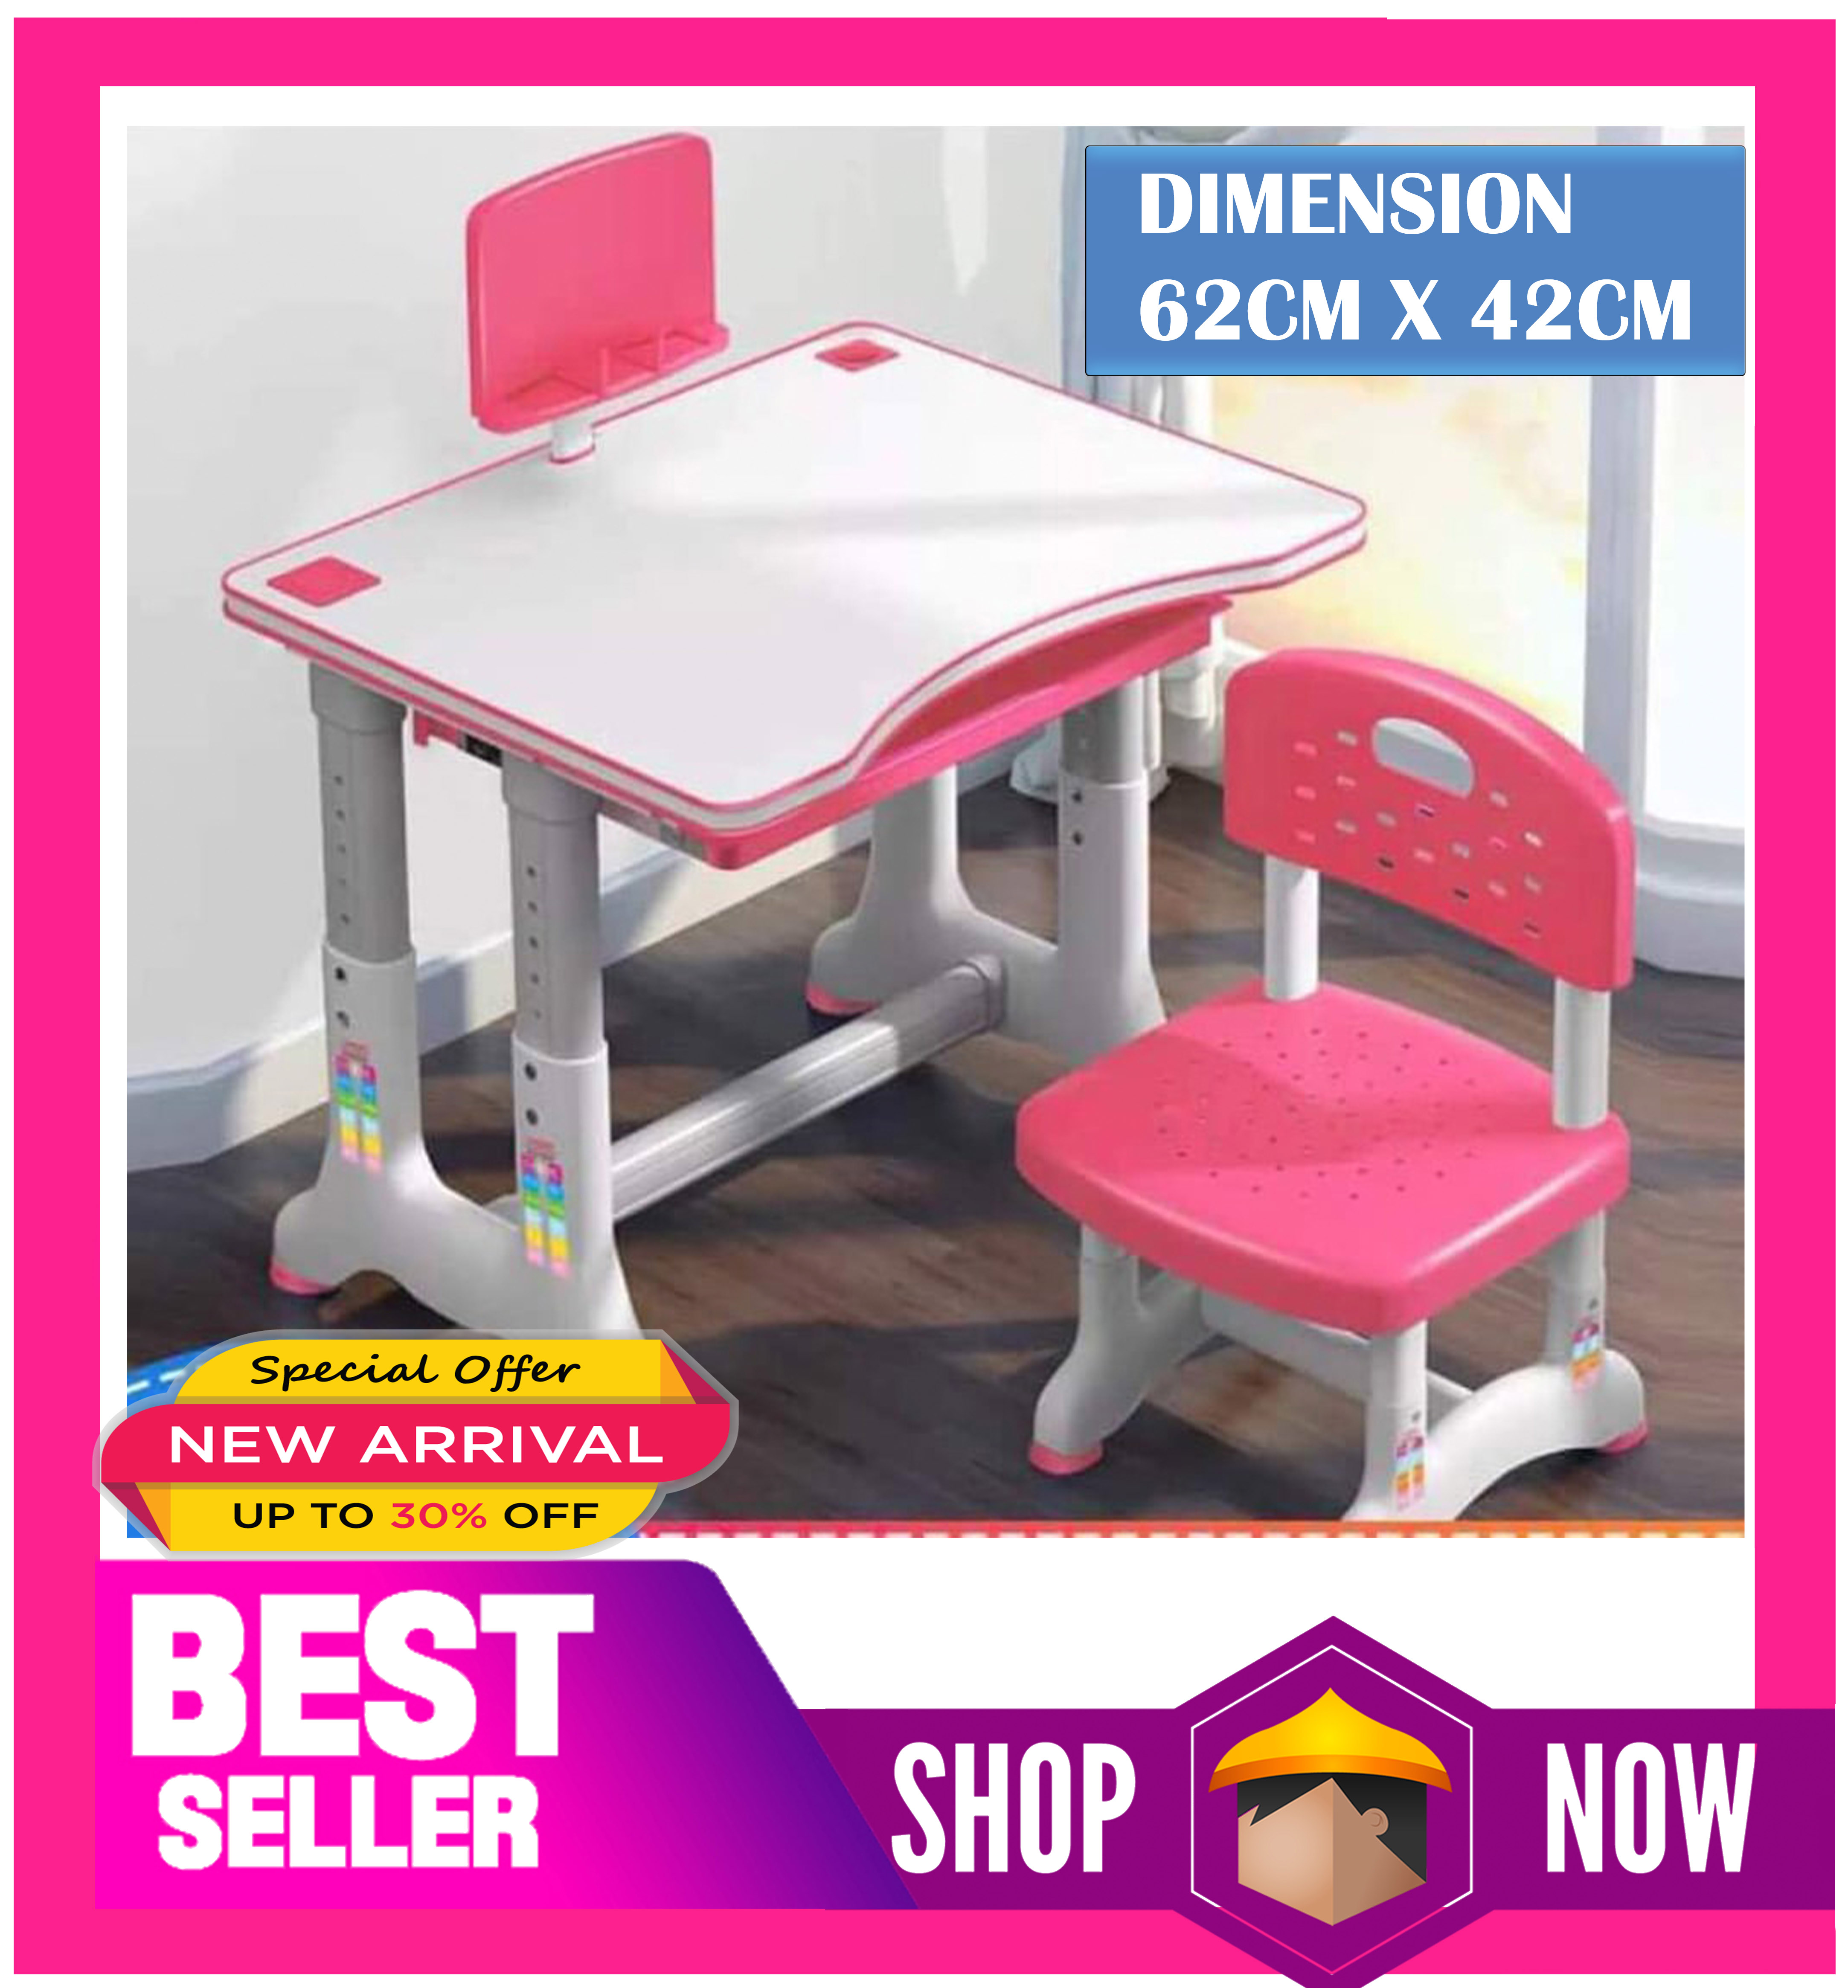 table and chair set for 6 year olds